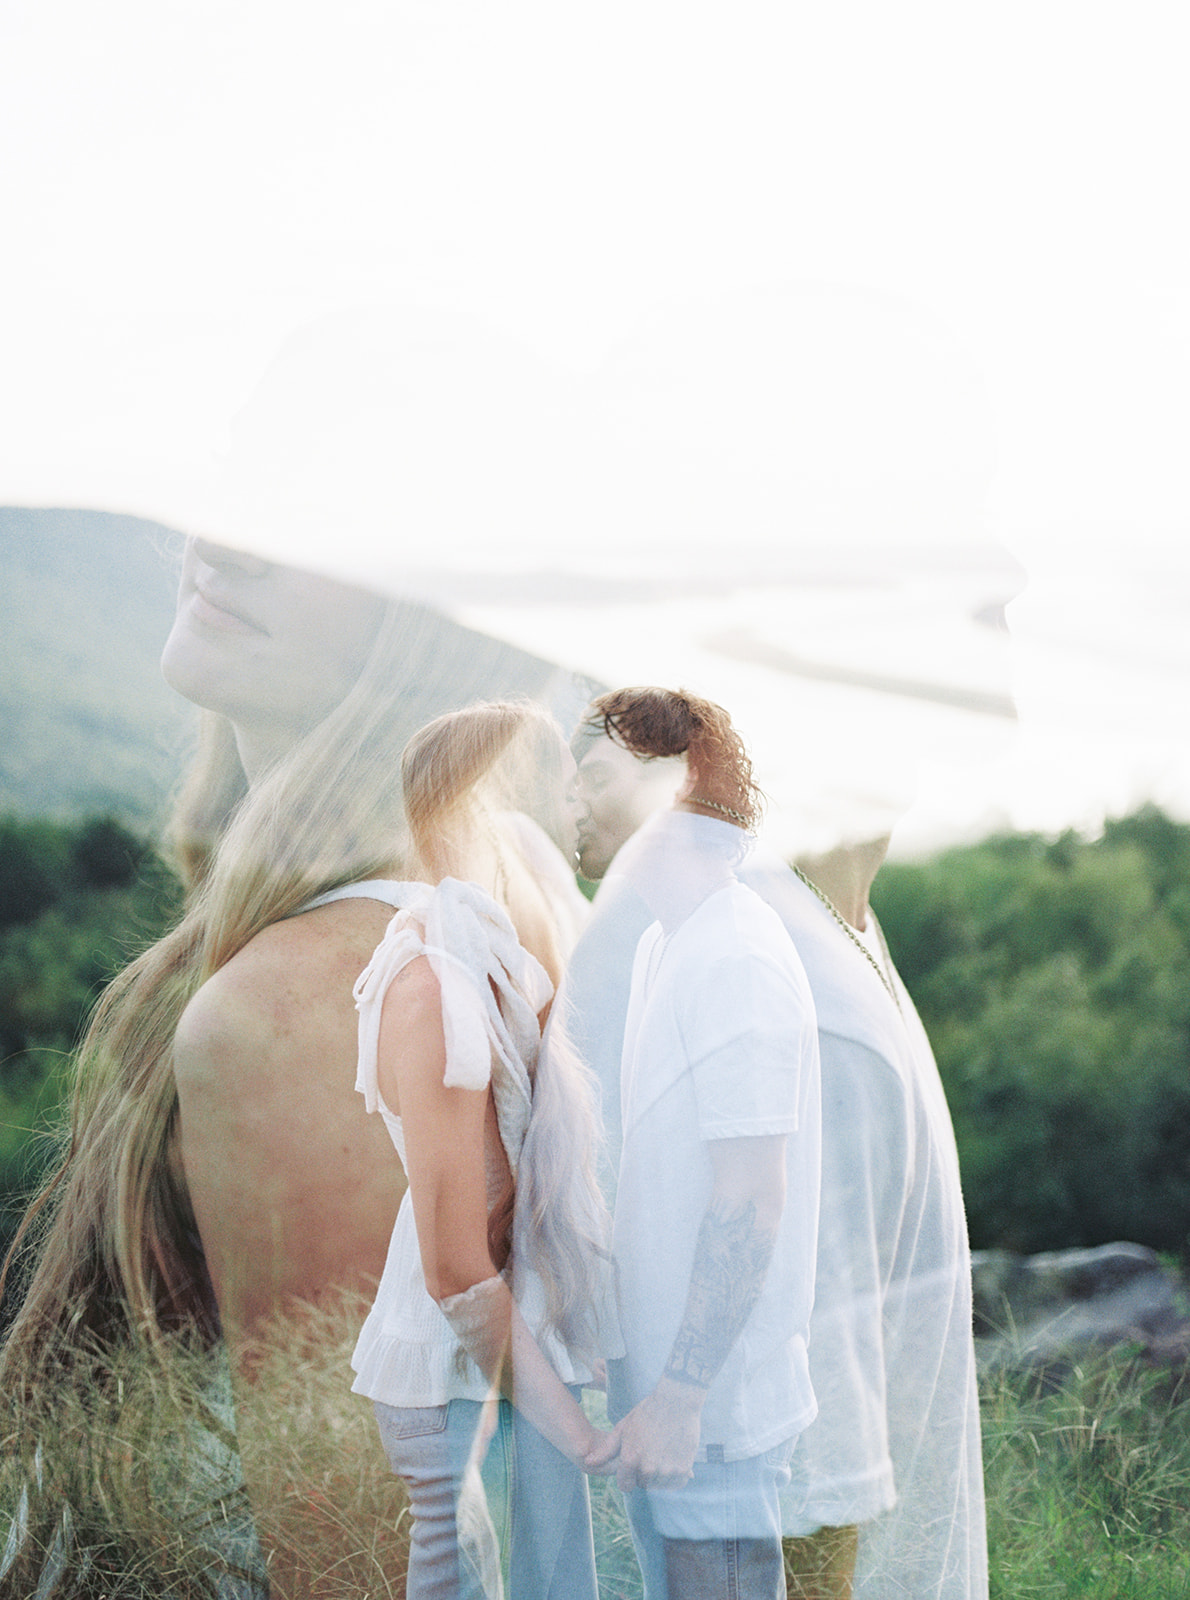 A double exposure kiss of an engaged couple in Section, Alabama by Kelsey Dawn Photography